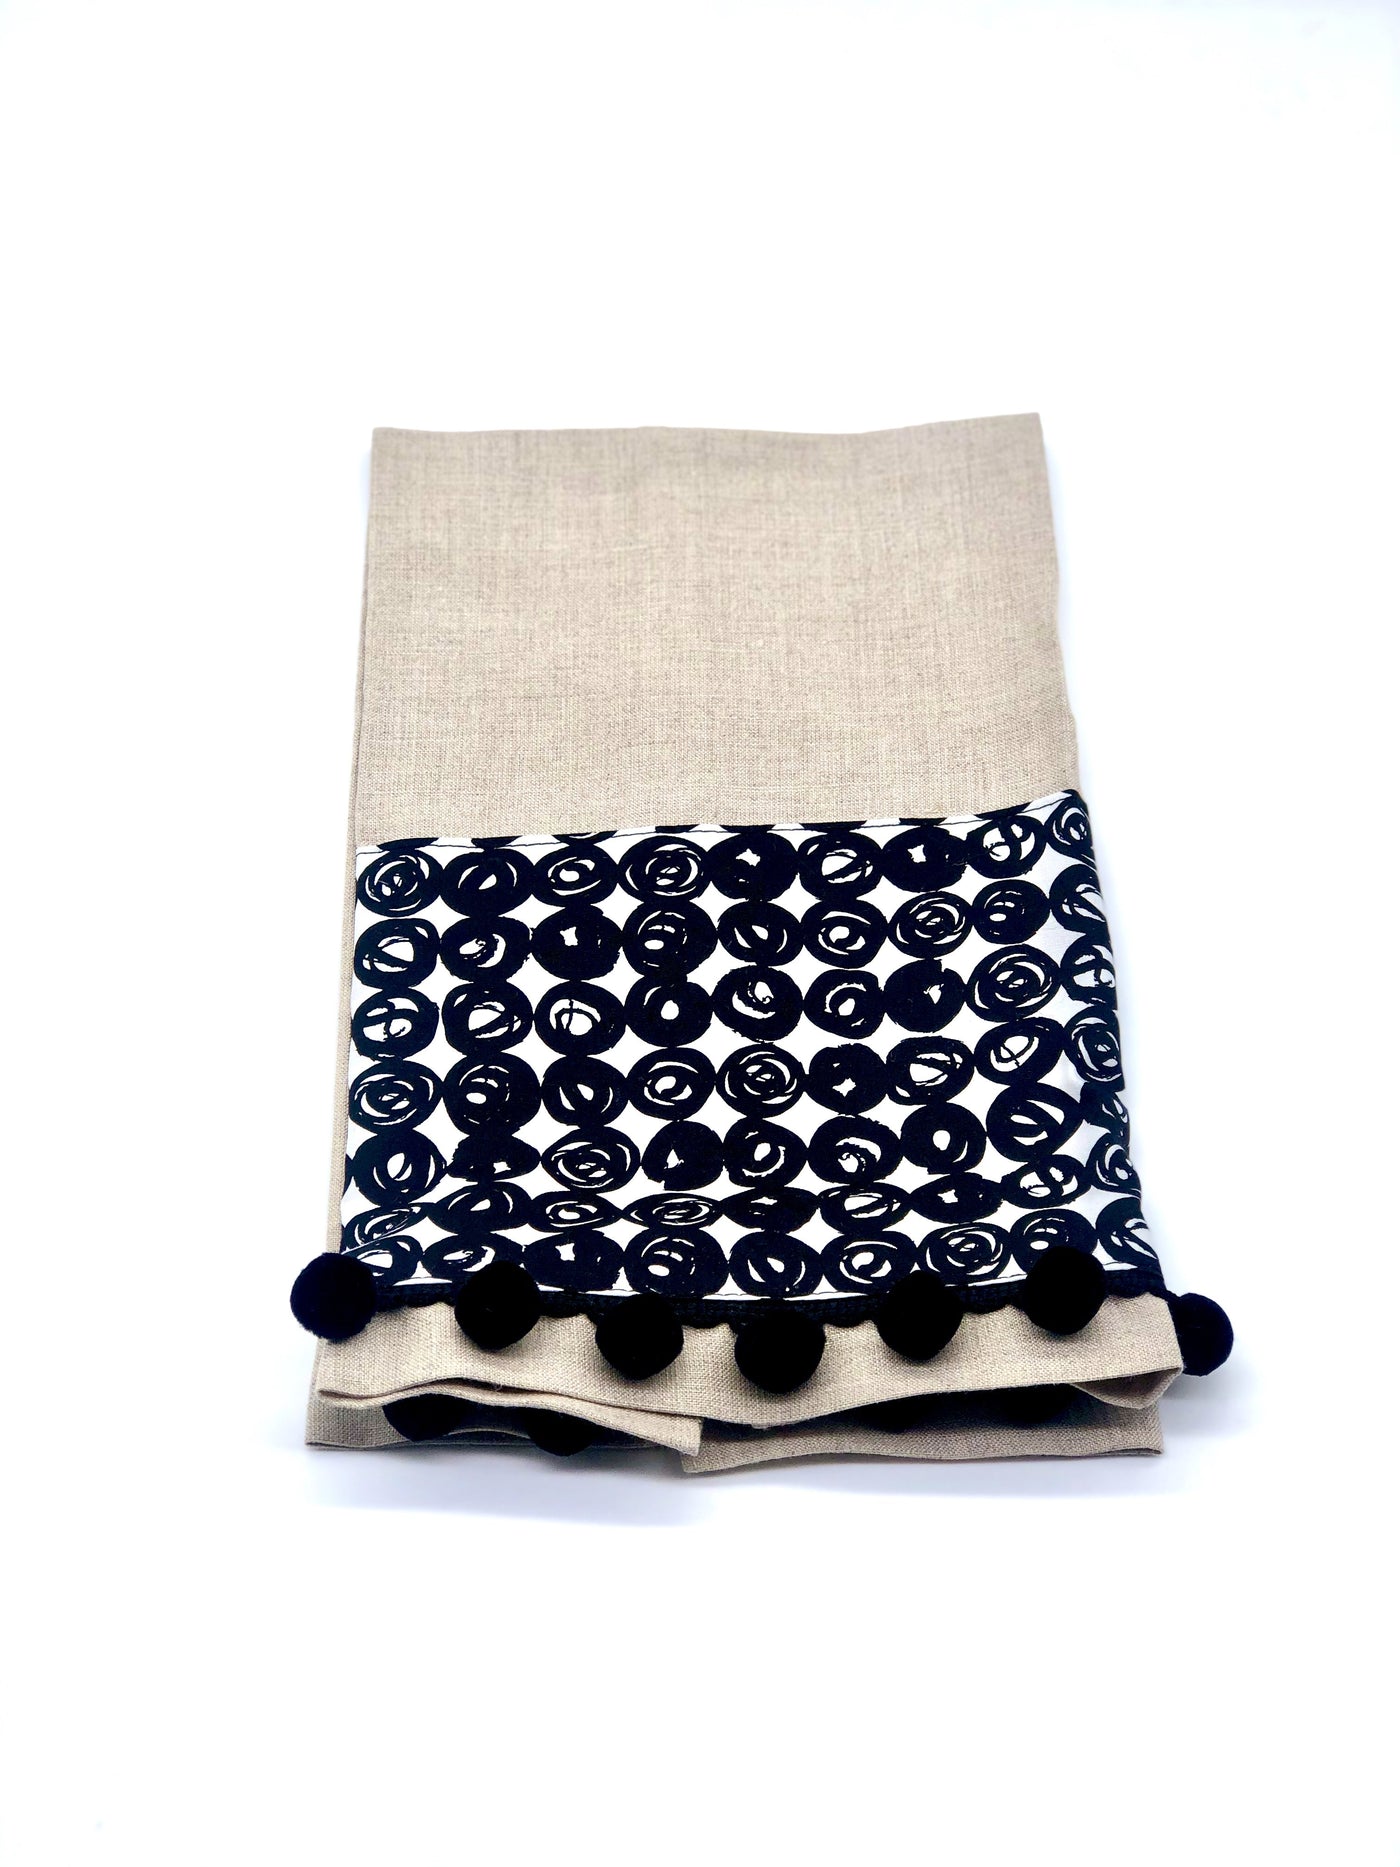 Oatmeal Linen Guest Towels - Fruit of the Vine